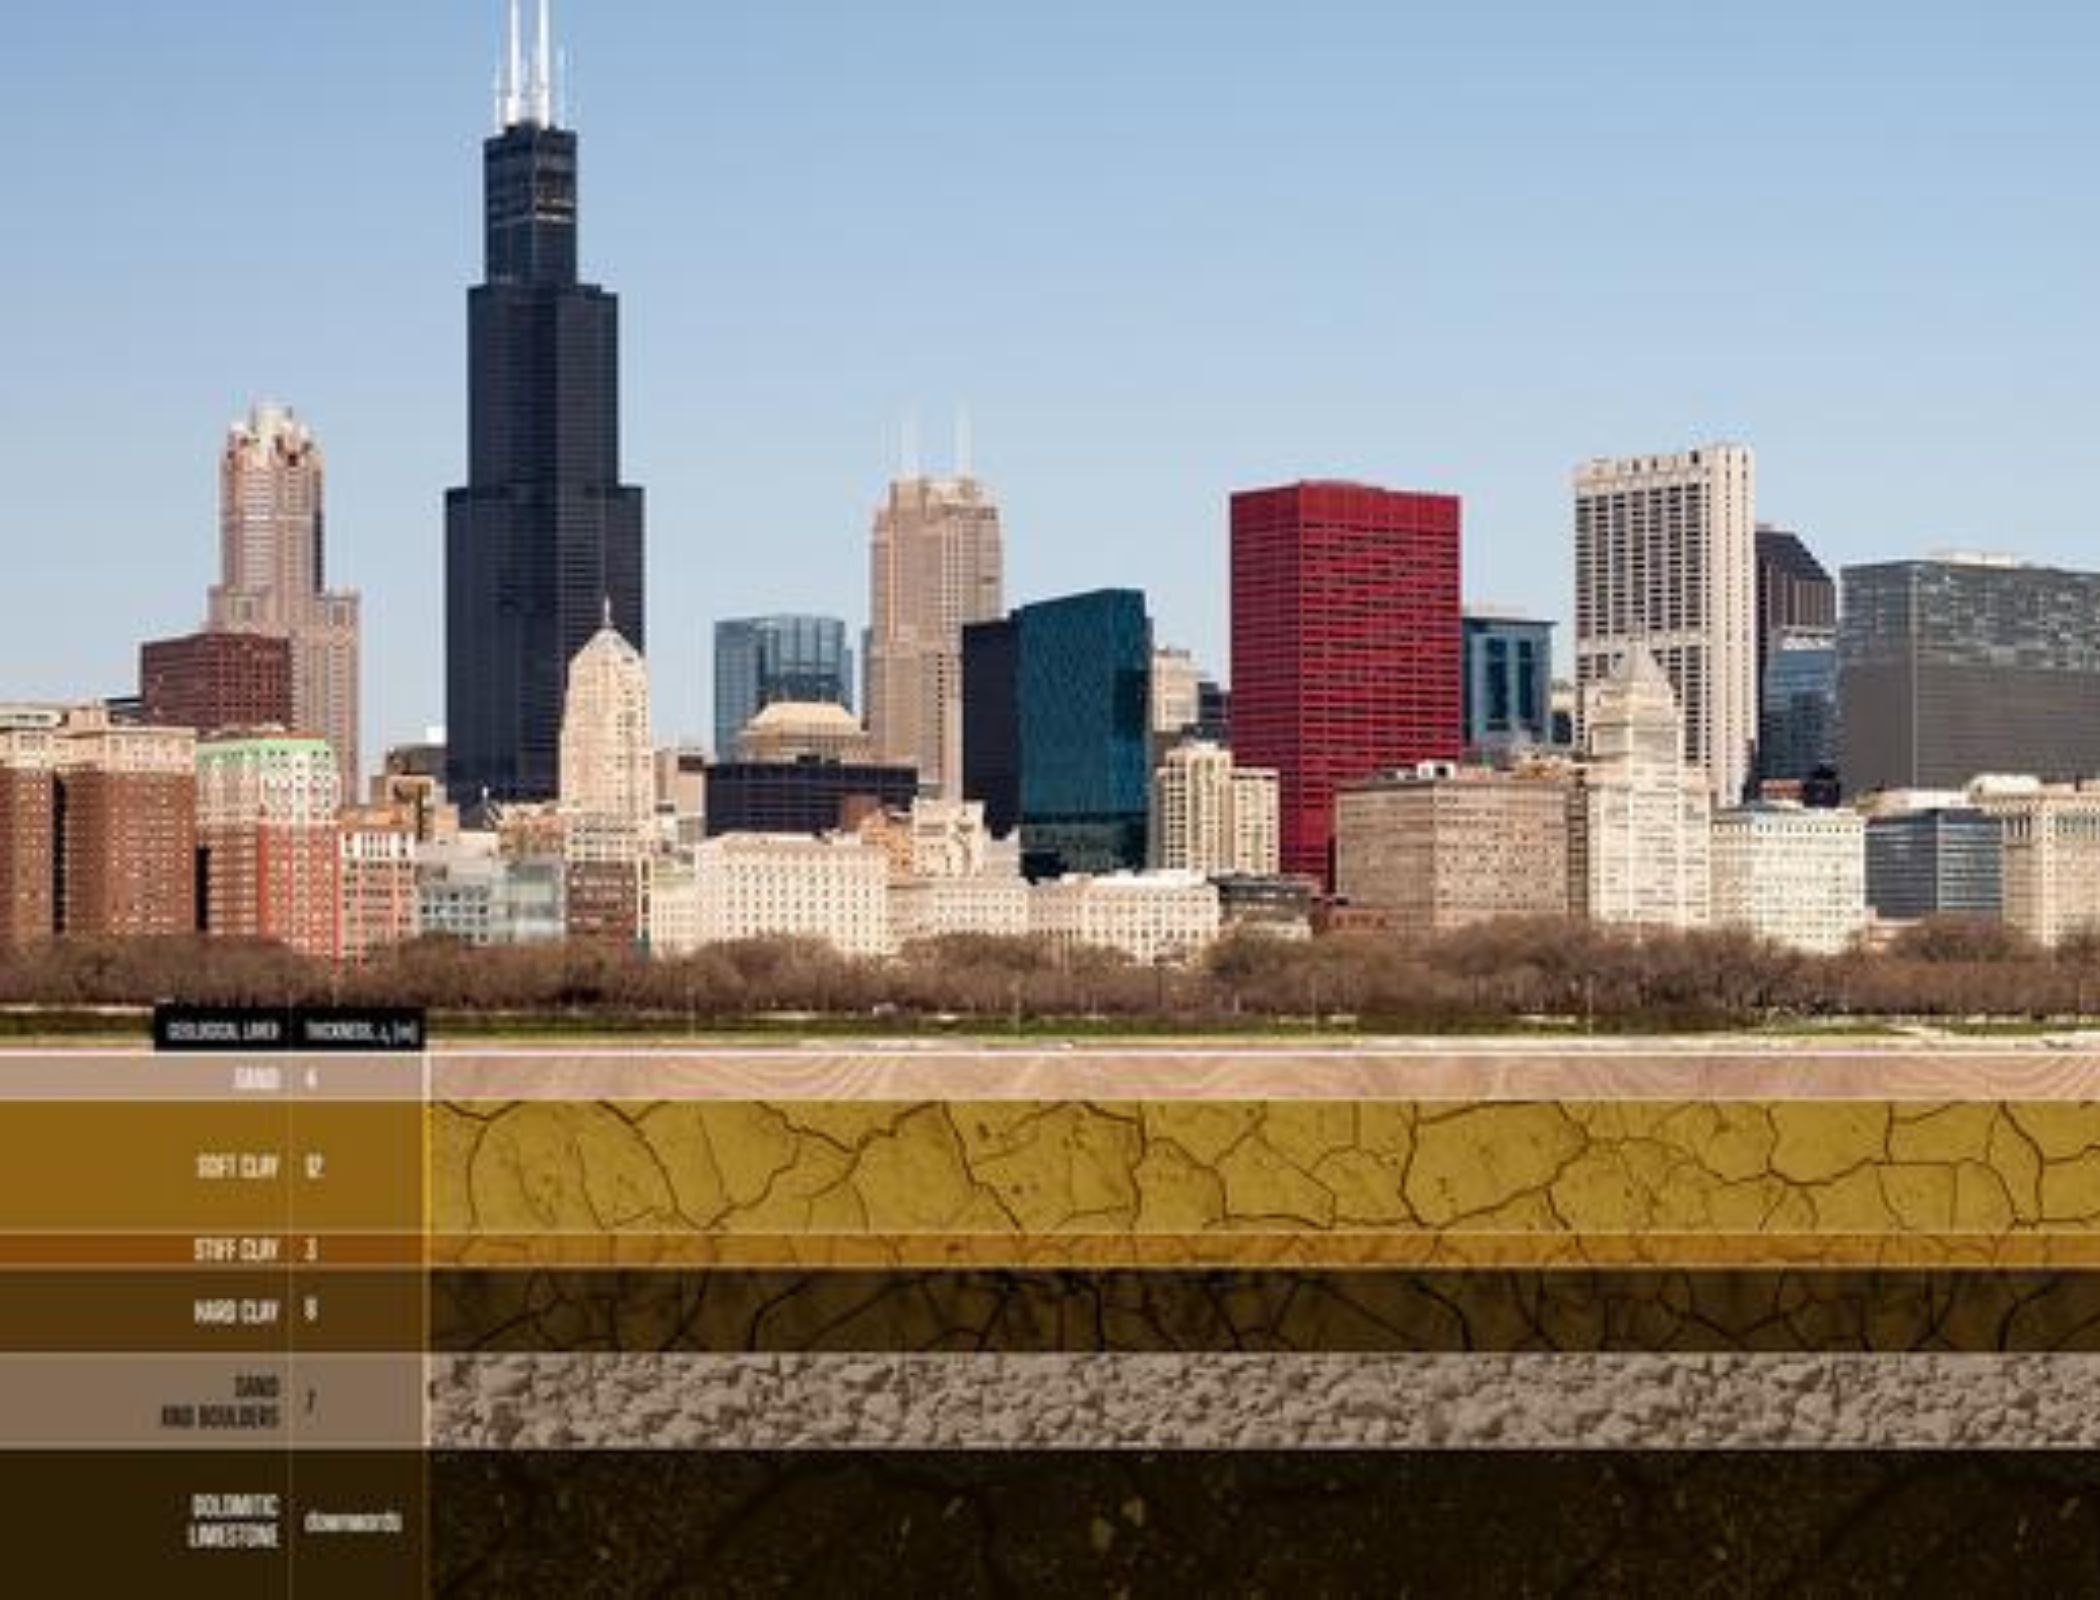 Scientists measure the impact of climate change on urban infrastructures